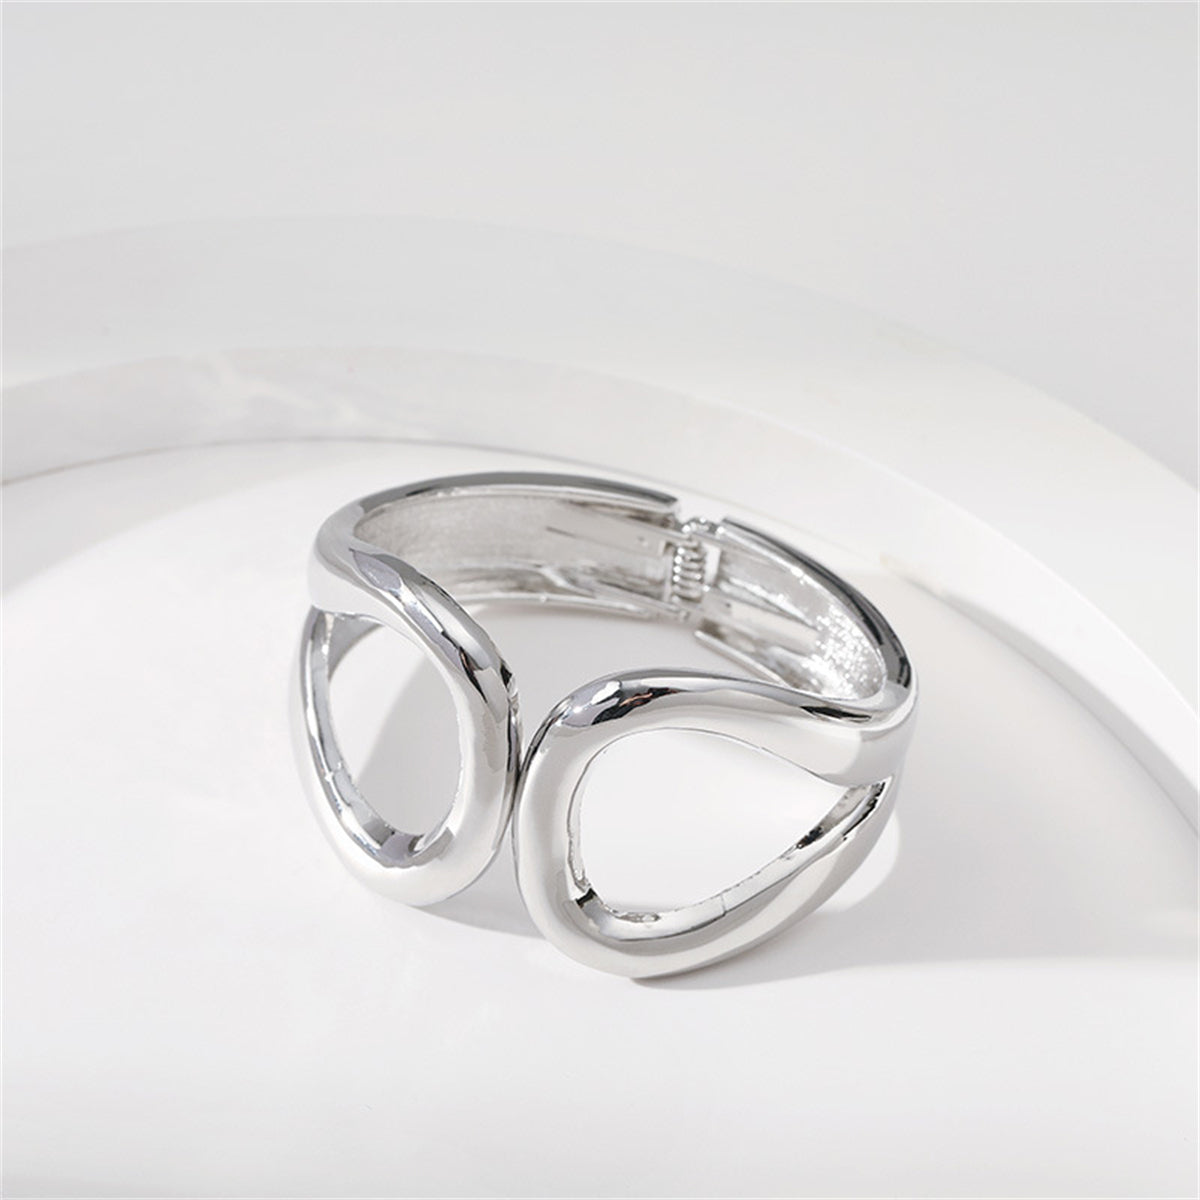 Silver-Plated Drop End Bangle